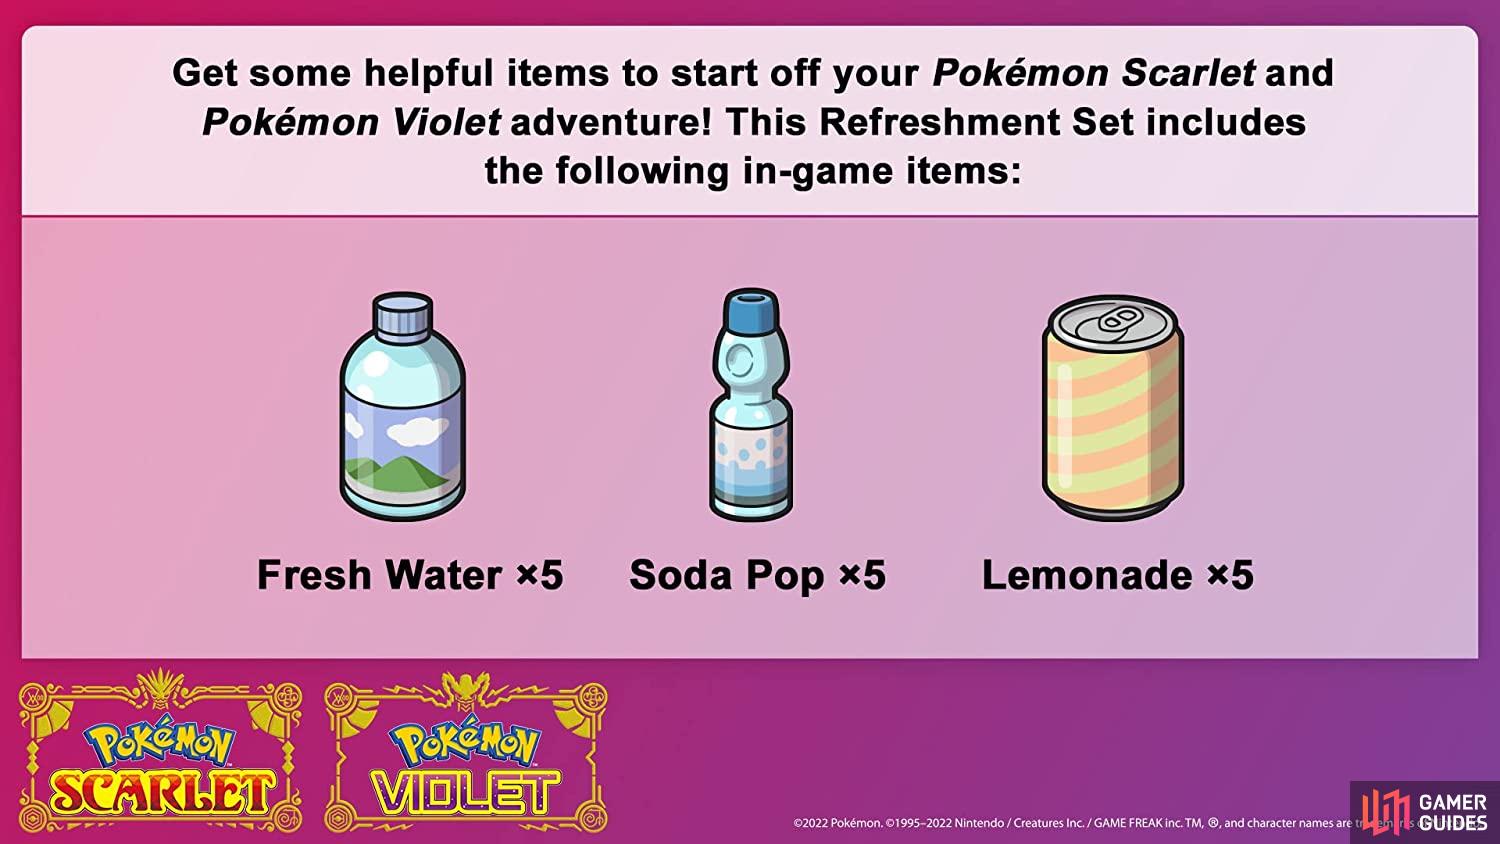 Item included in the Refreshment Set. (Credit: The Pokémon Company)